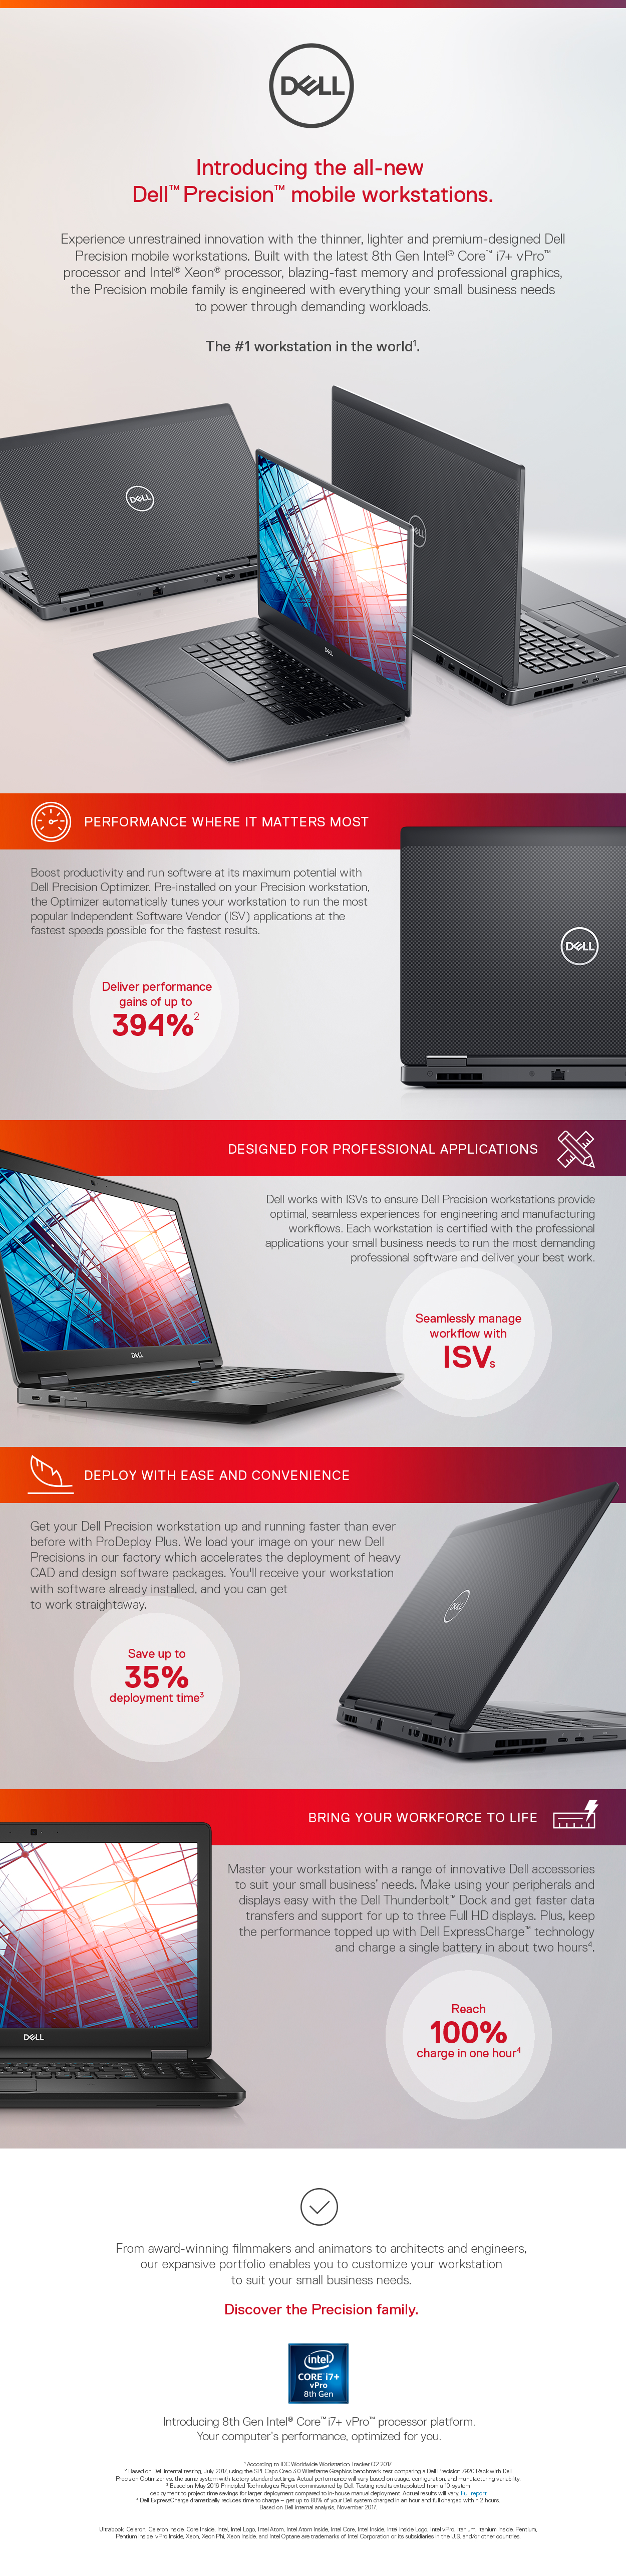 Introducing the all-new Dell™ Precision™ mobile workstations